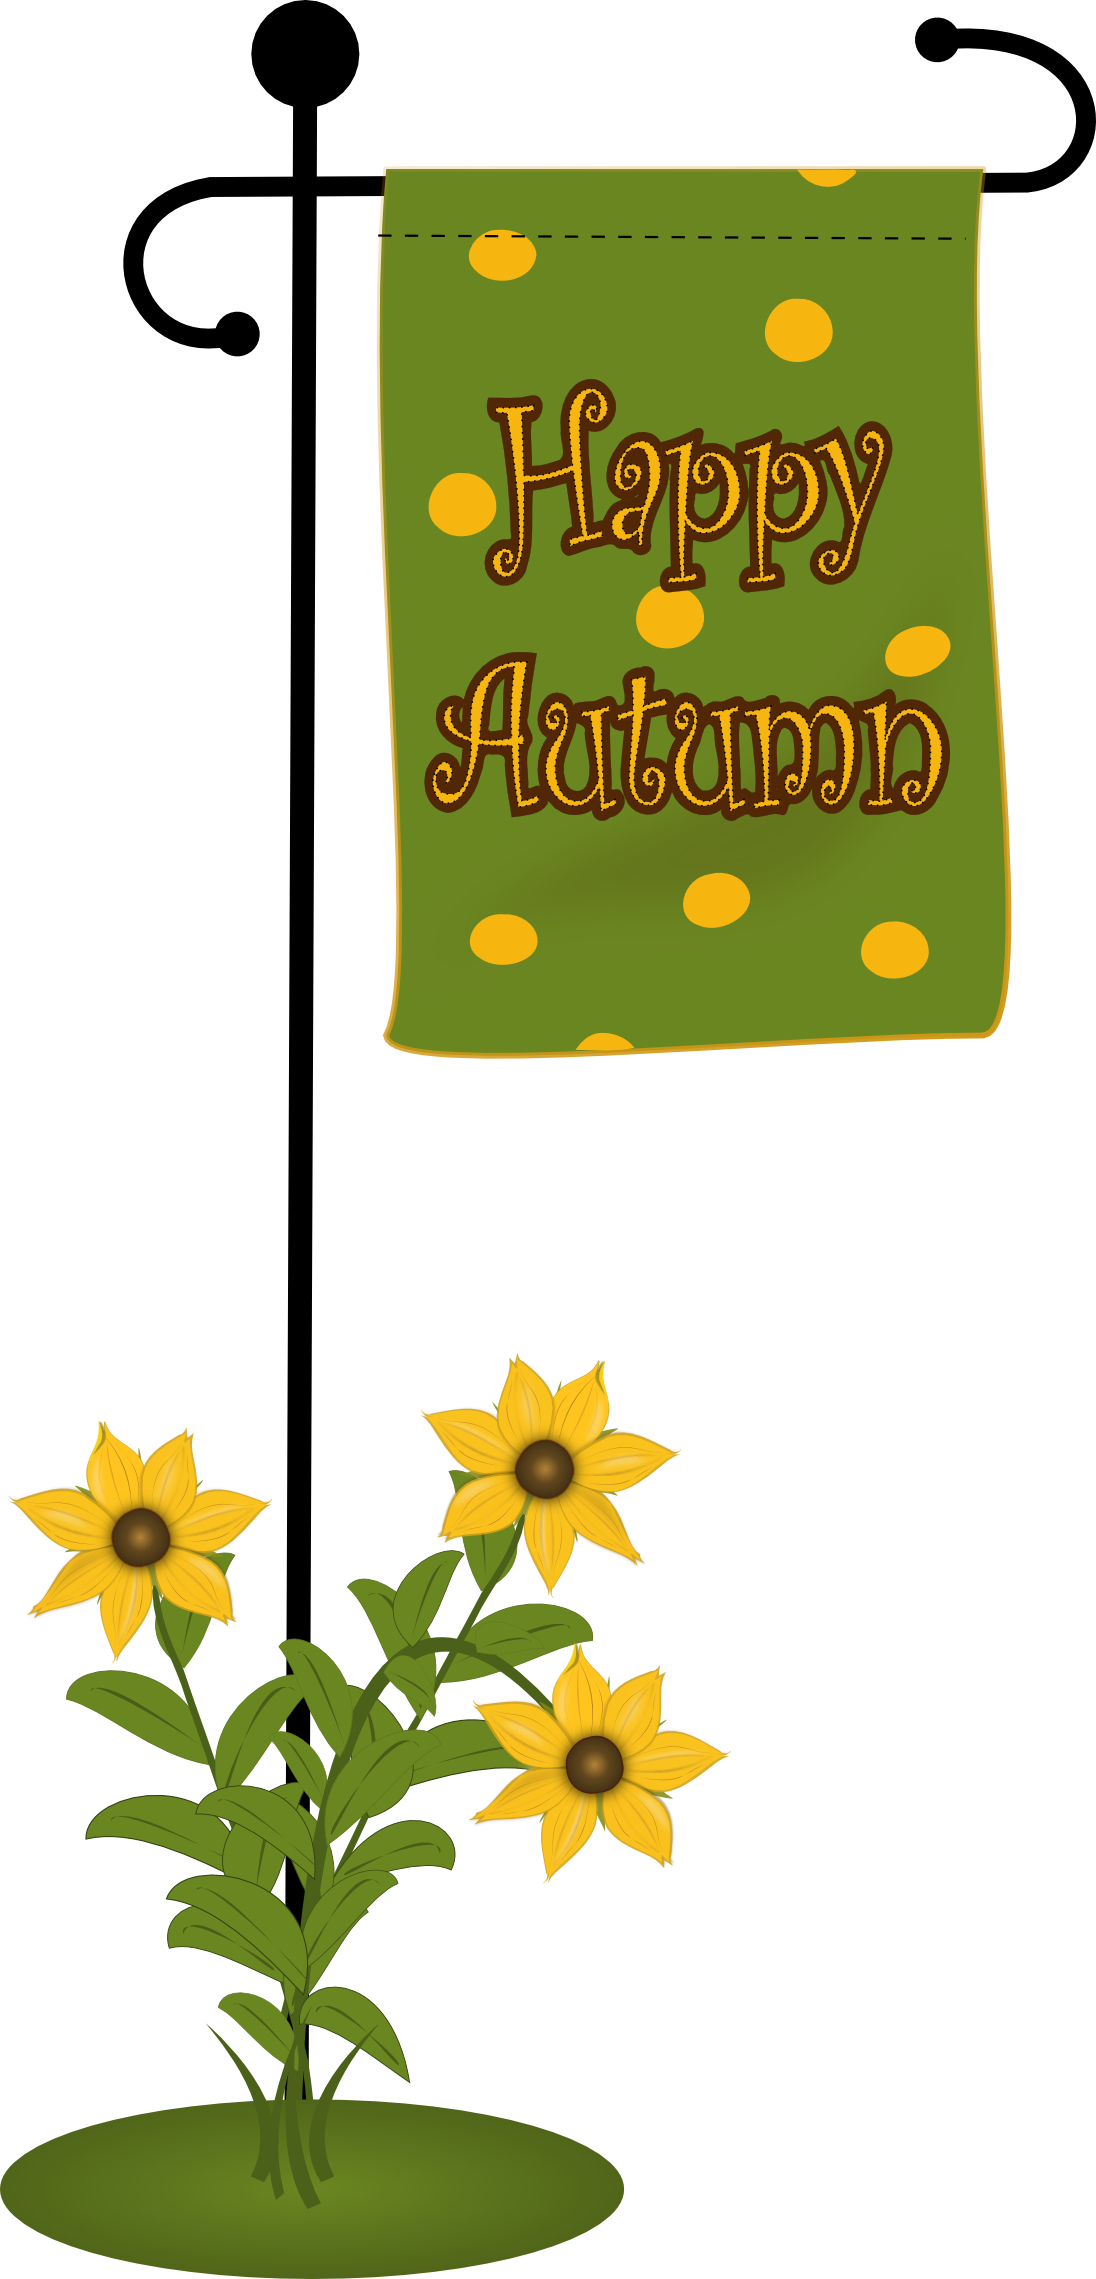 Happy Autumn Flag With Fowers - Black-eyed Susan (1096x2279)